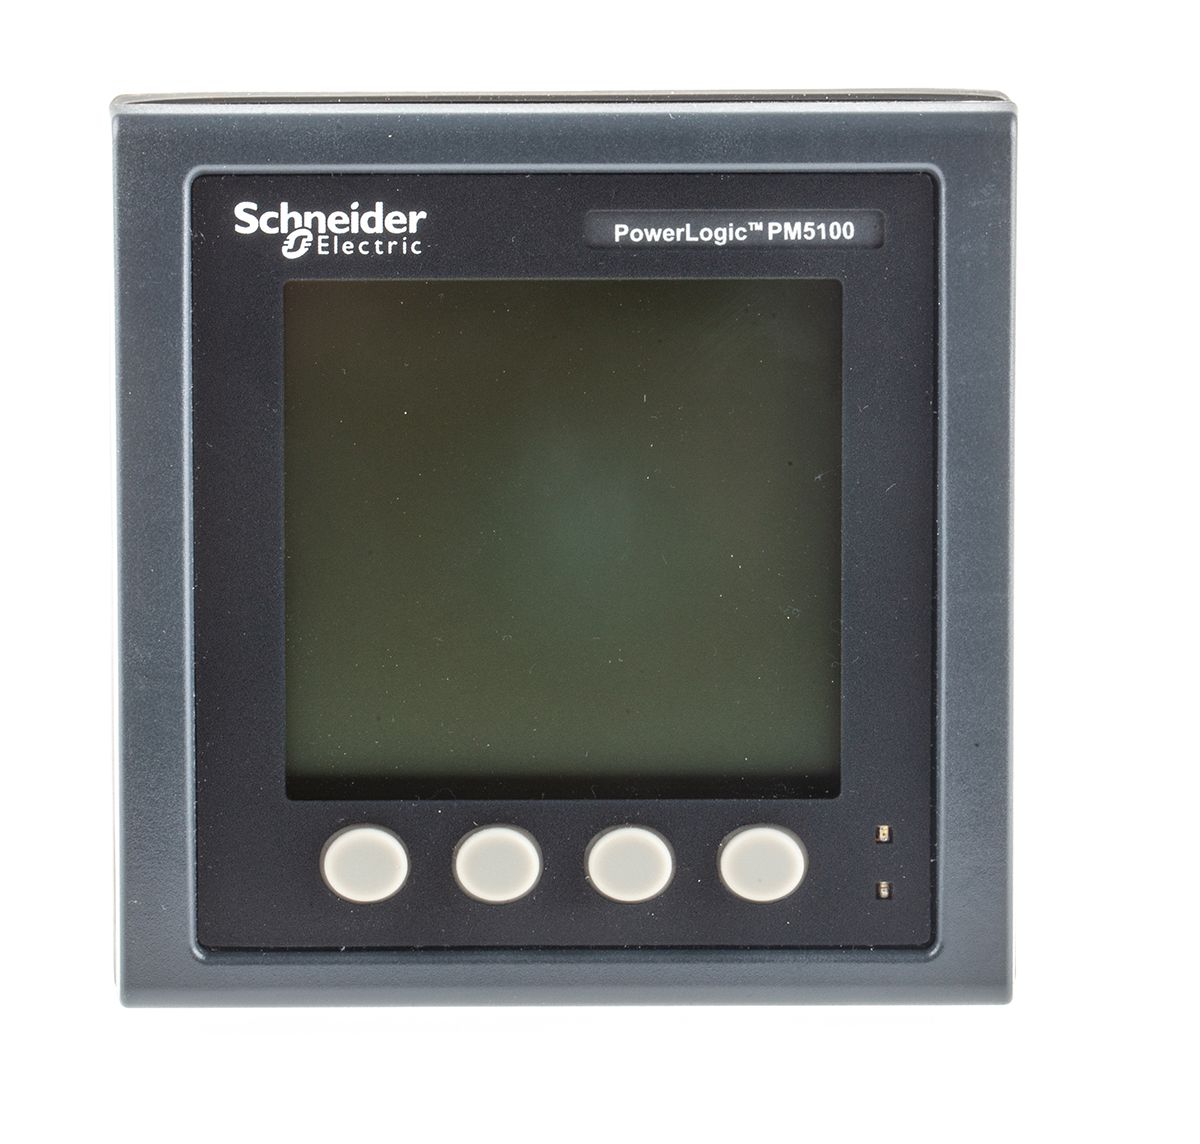 Schneider Electric 3 Phase LCD Digital Power Meter, Type Electromechanical